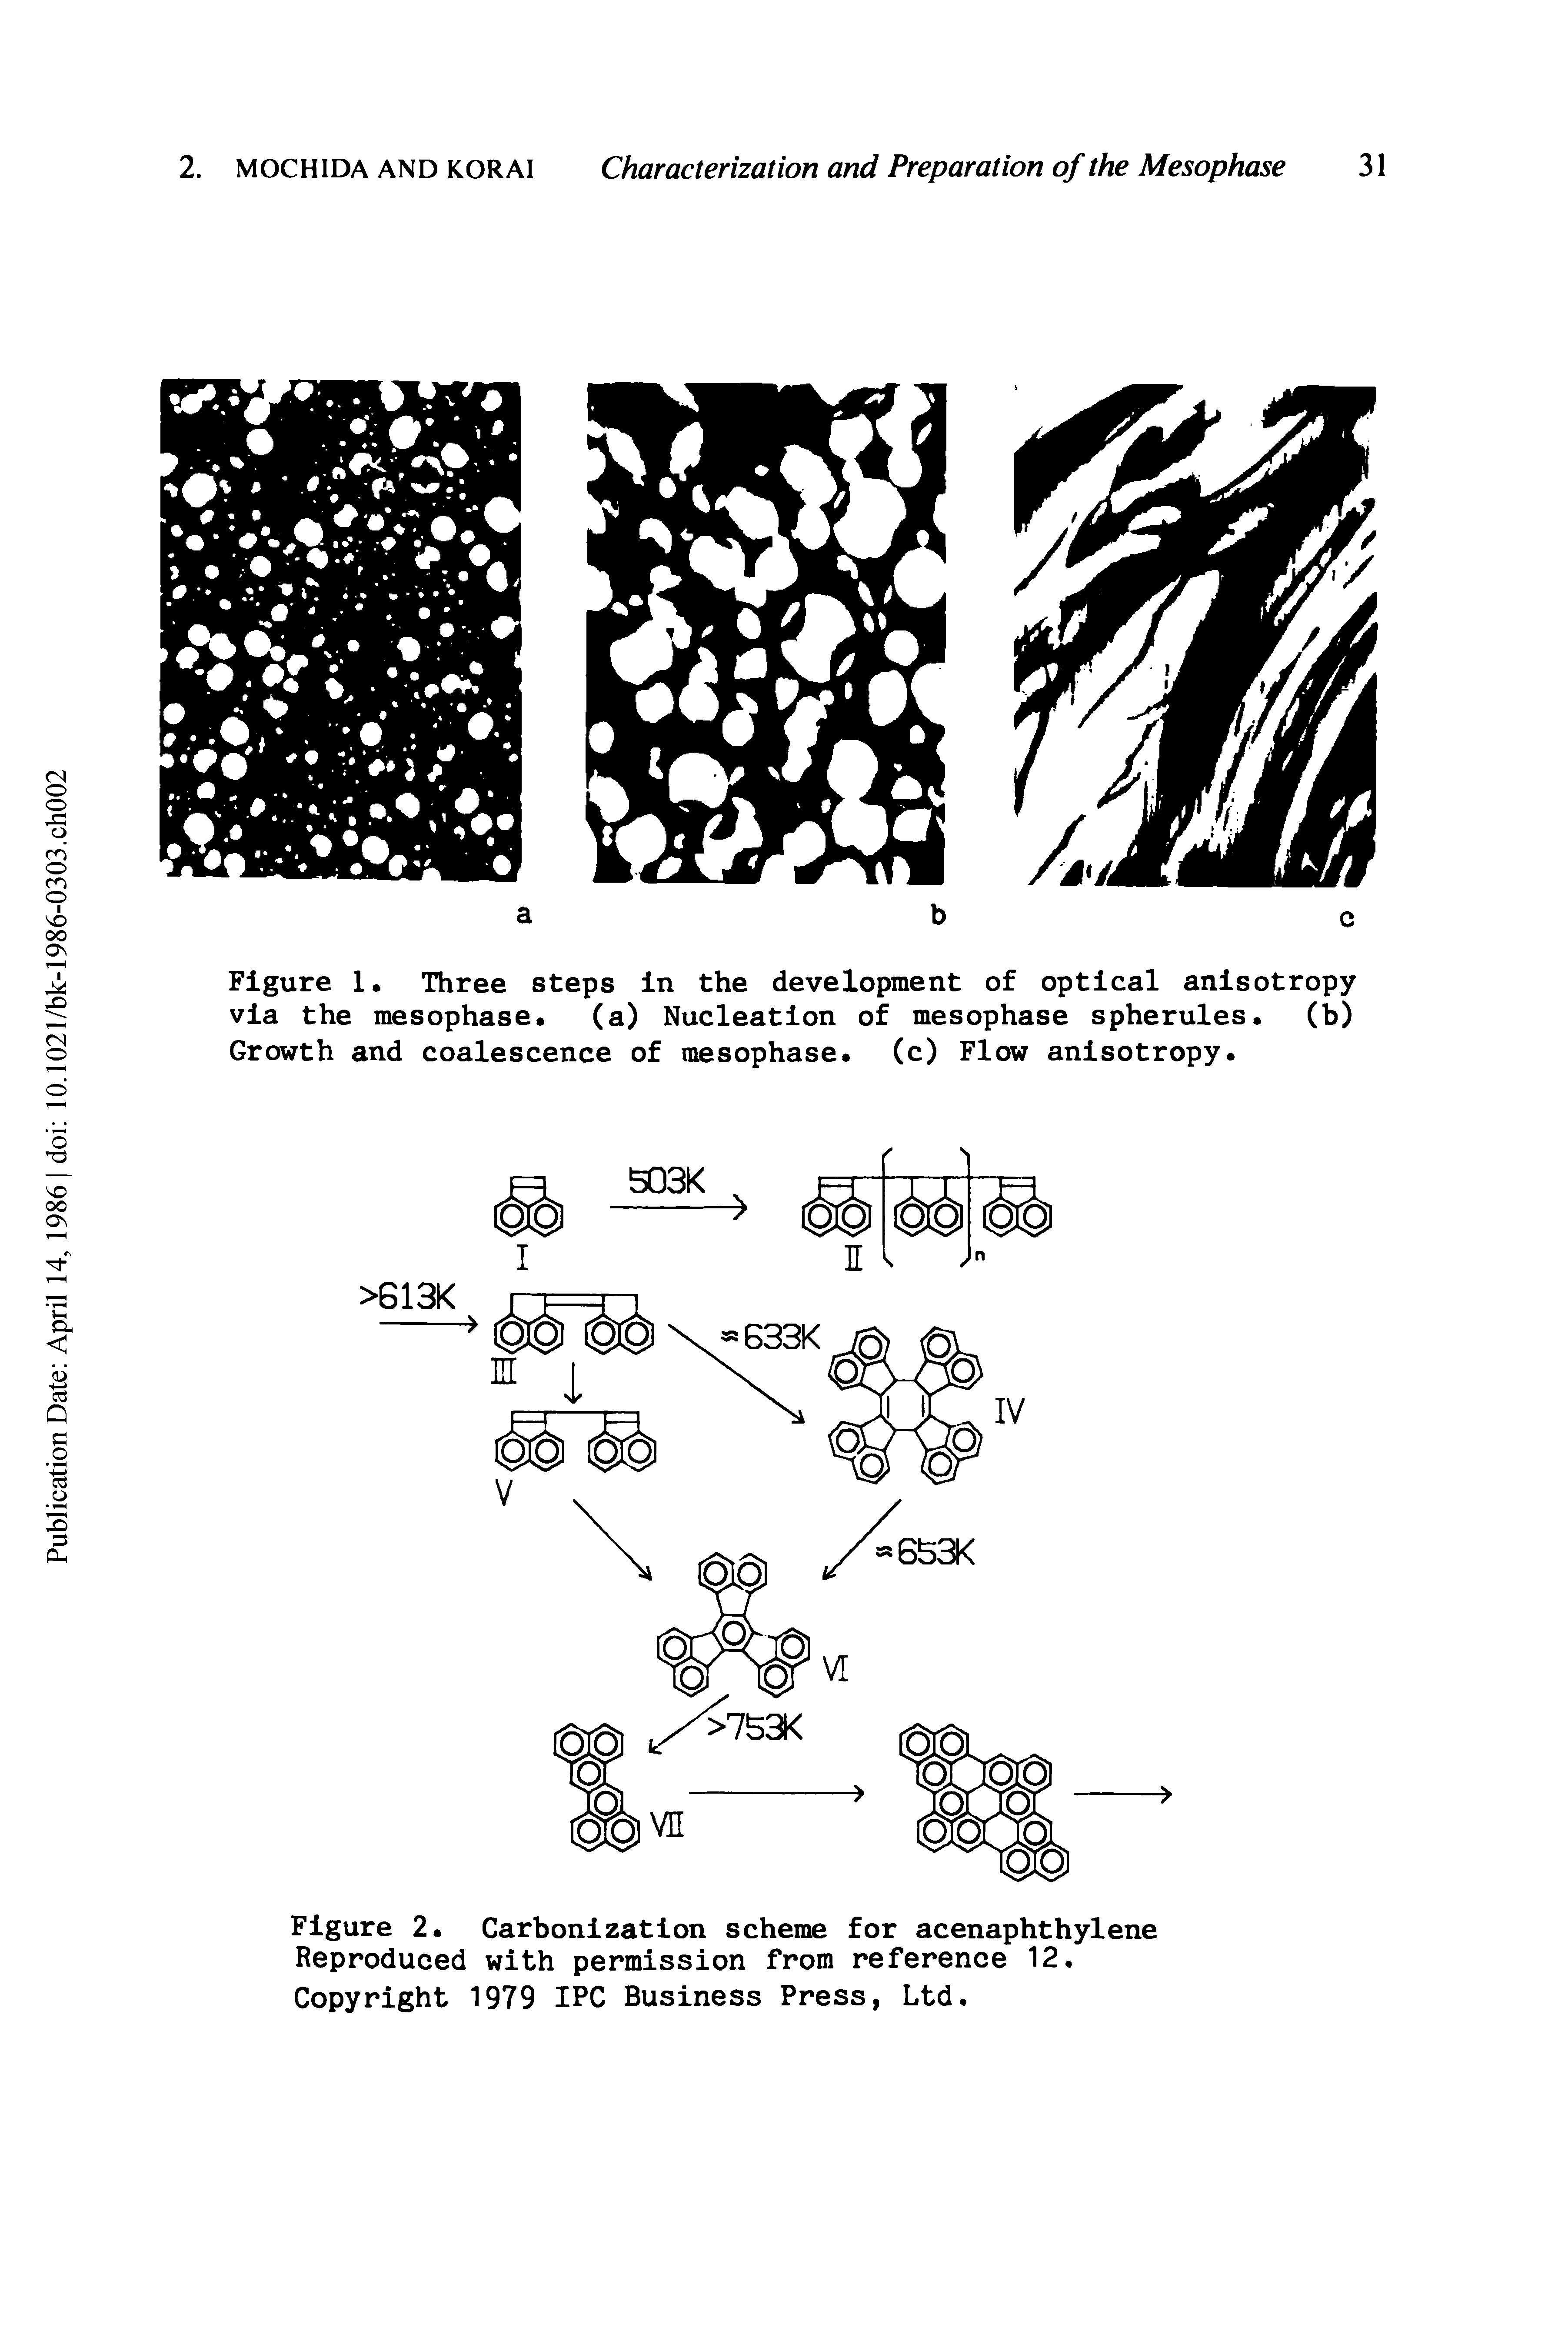 Figure 1. Three steps in the development of optical anisotropy via the mesophase. (a) Nucleation of mesophase spherules. (b) Growth and coalescence of mesophase. (c) Flow anisotropy.